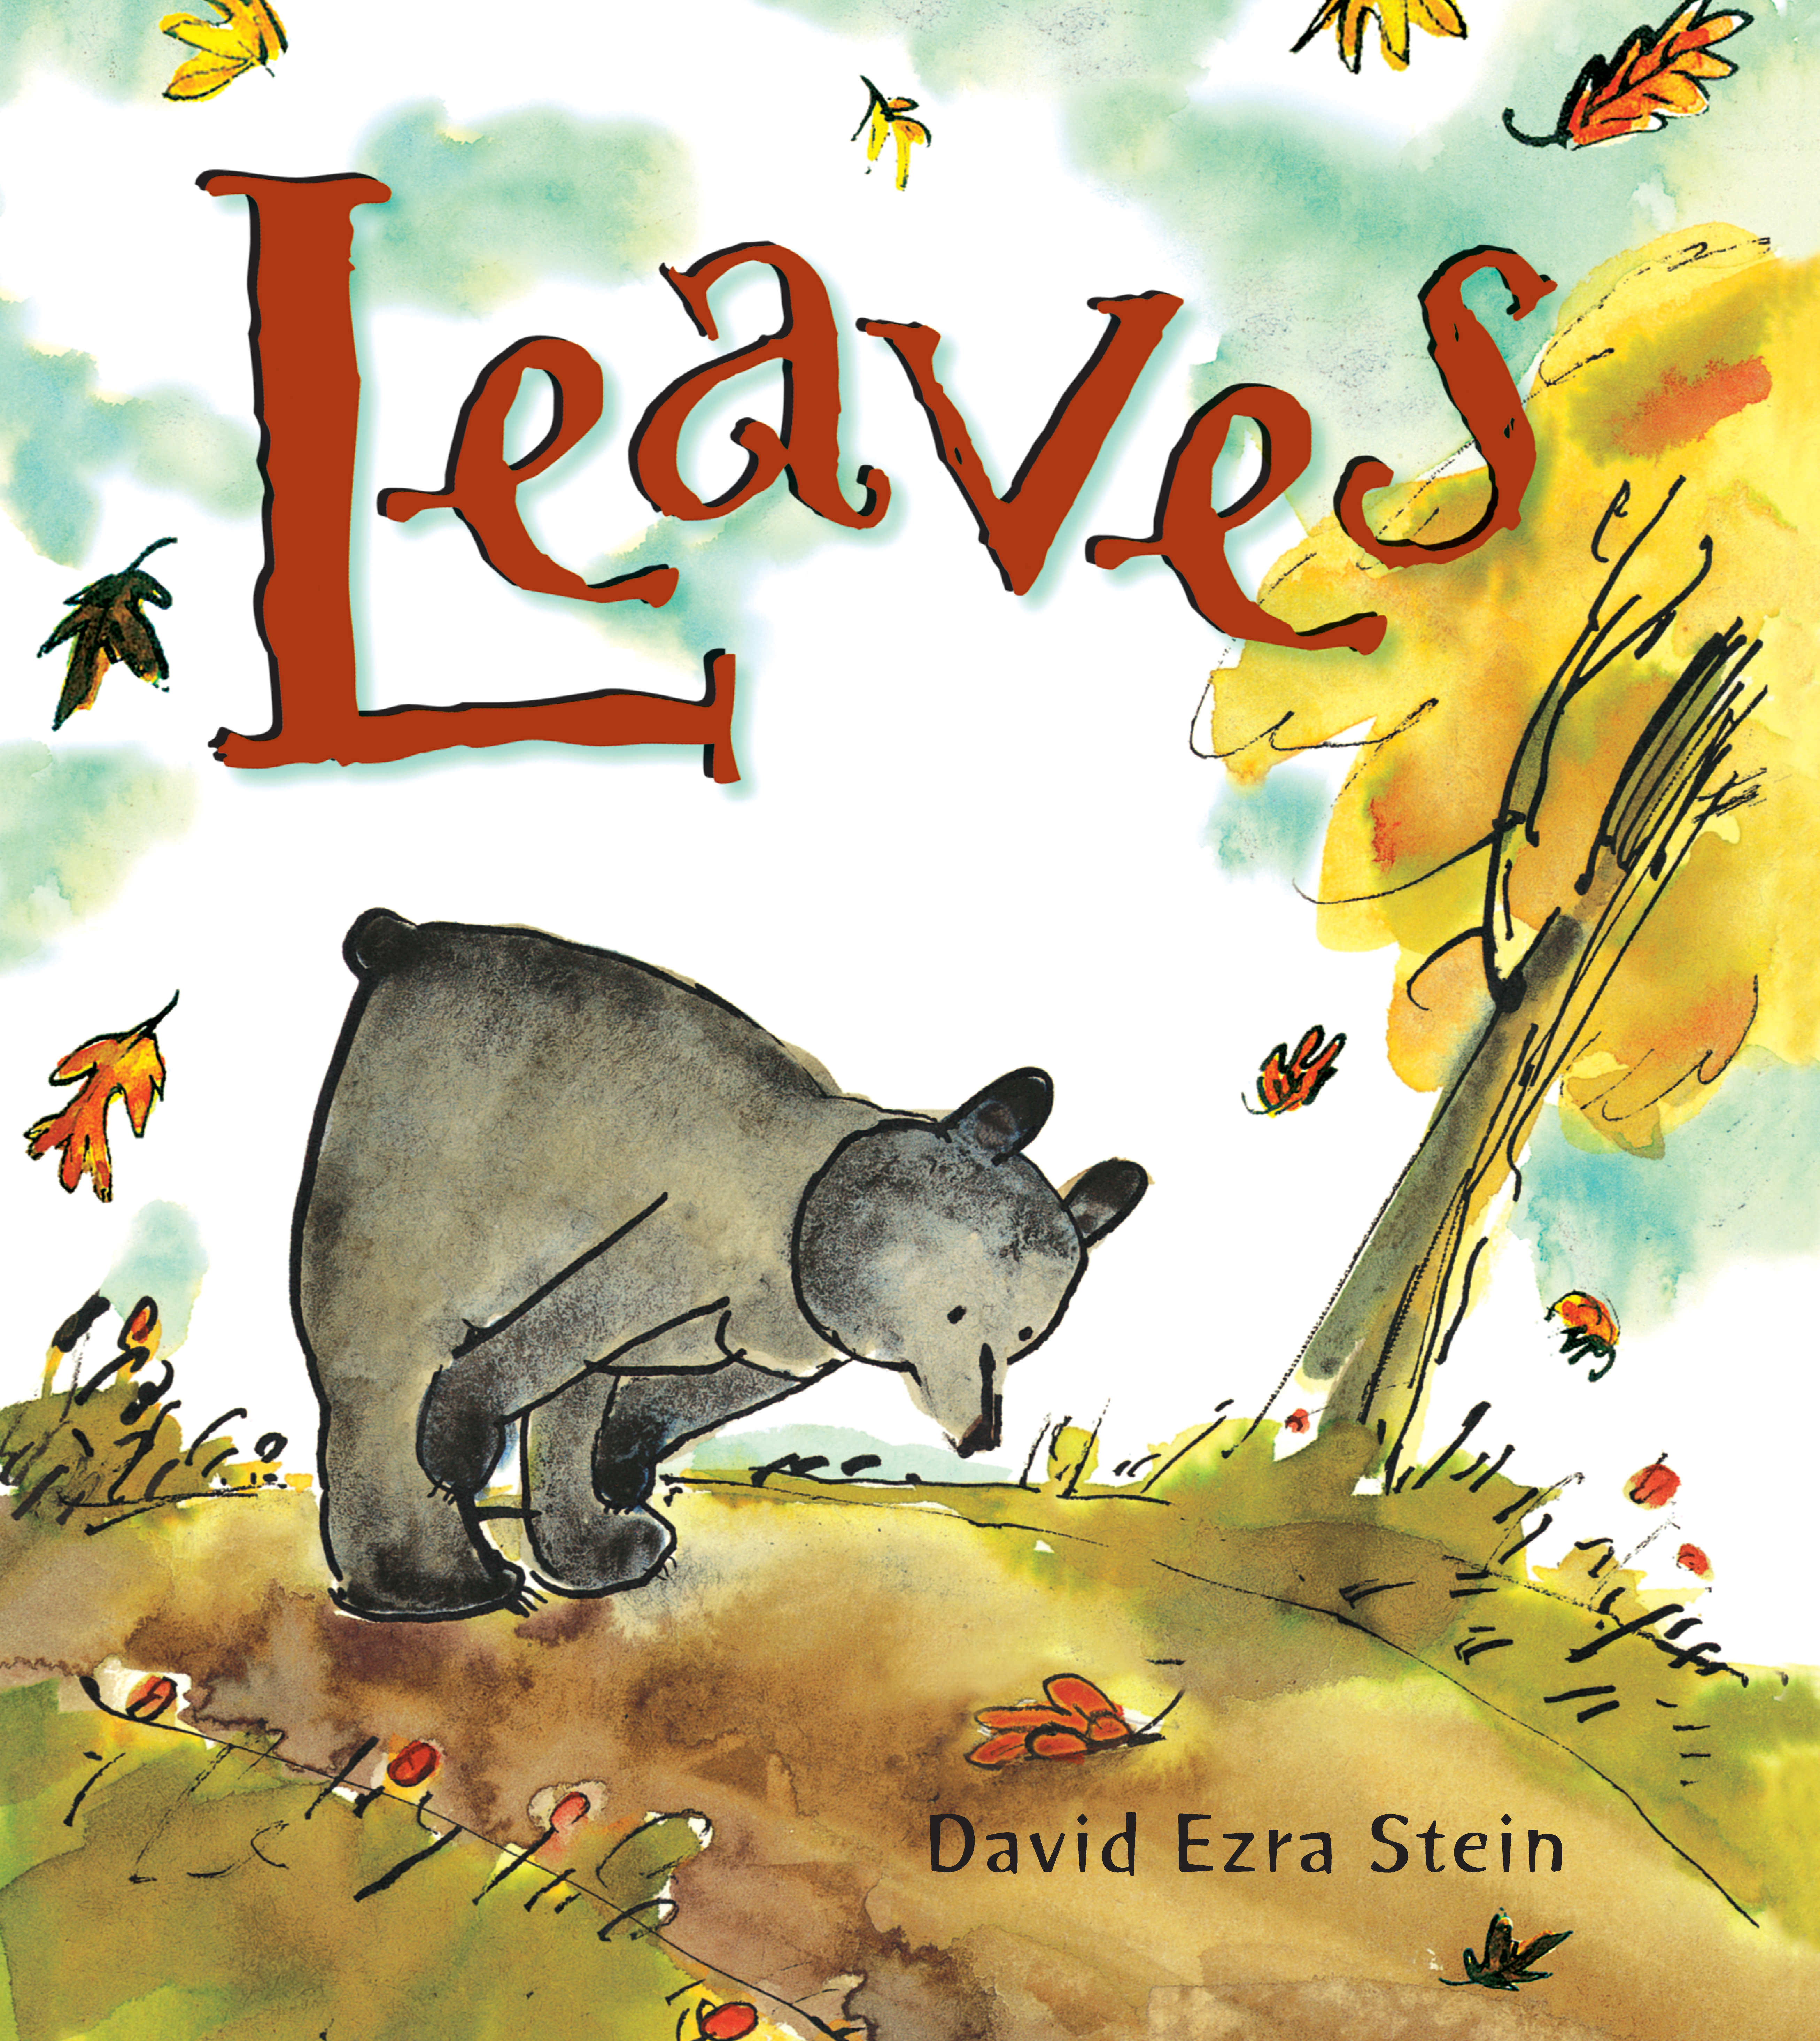 Cover for Leaves by David Ezra Stein showing a bear looking at leaves that have fallen off of a tree